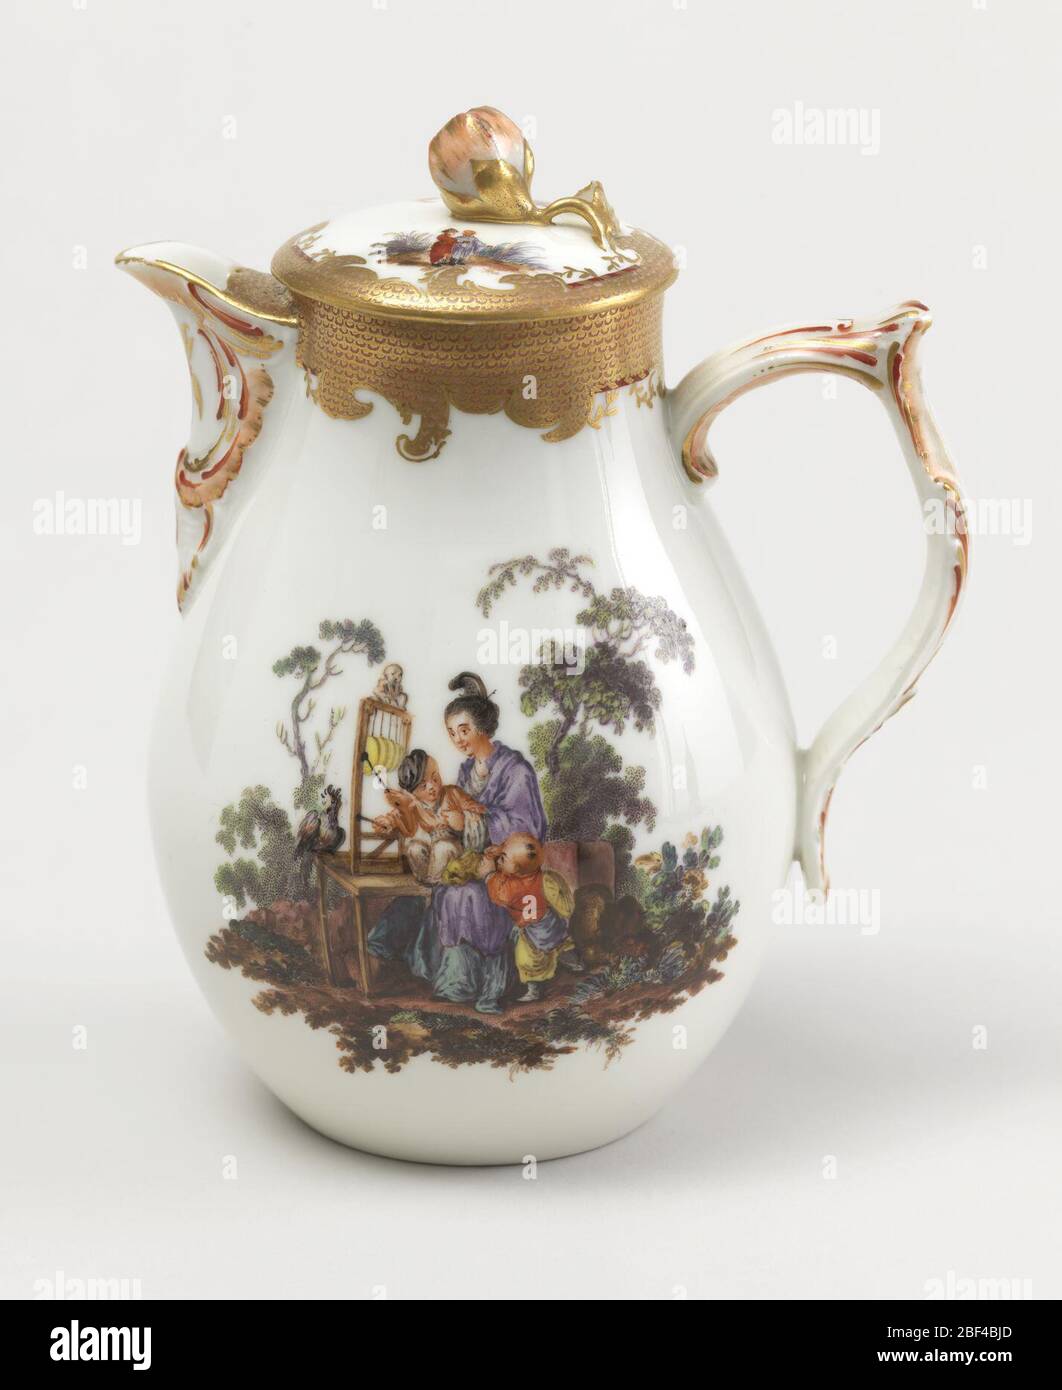 Covered Milk Jug with Chinoiserie Vignettes. Pear-shaped, bracket lip, double-curved strap handle. Small flat cover with flower finial. Vignettes of Chinoiserie figures in landscape, with gilded and painted imbricated borders. Stock Photo